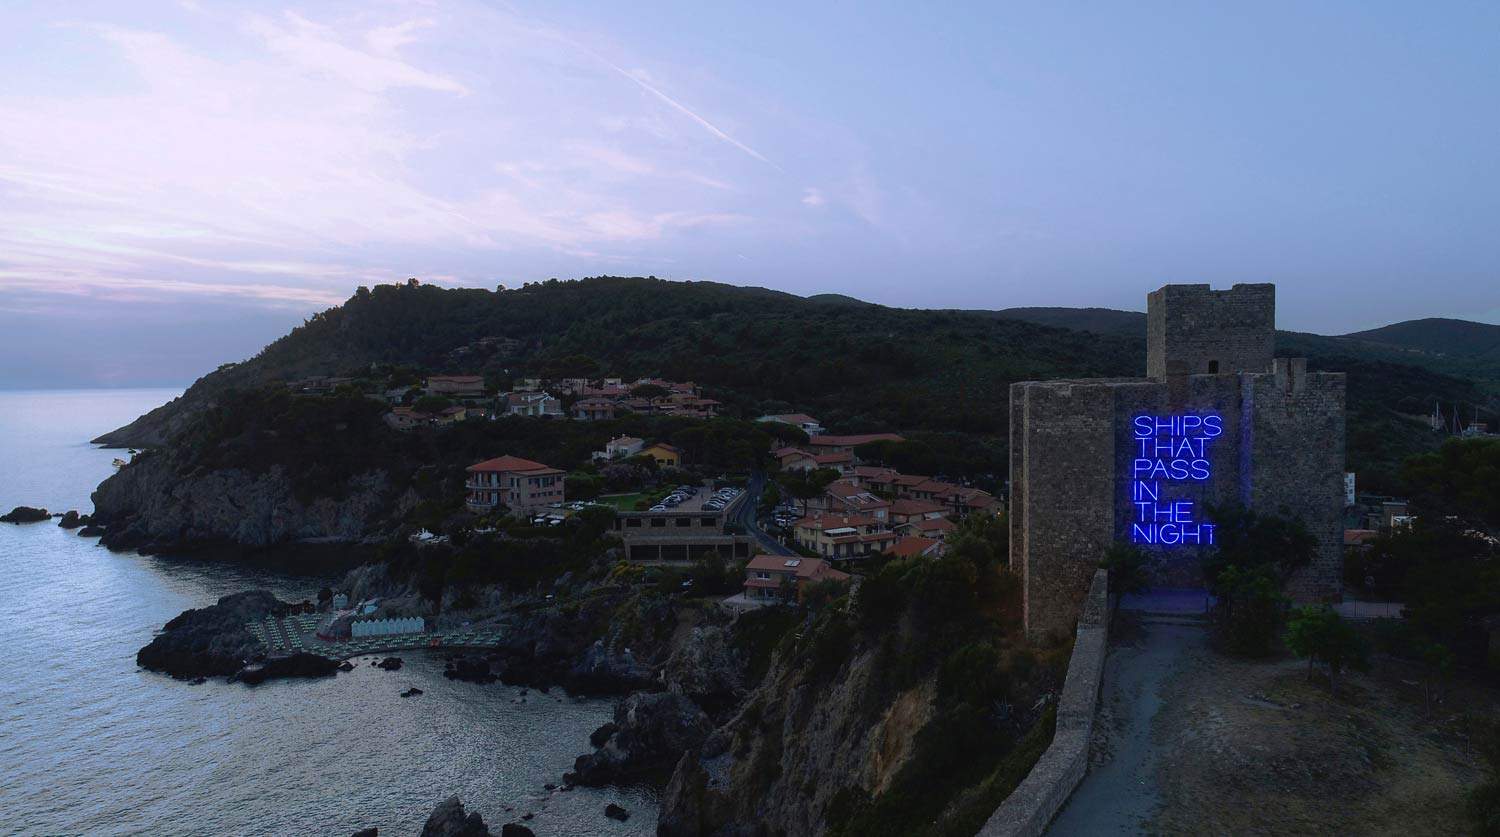 A large neon light on the Fortress of Talamone. Maurizio Nannucci's work for Hypermaremma.